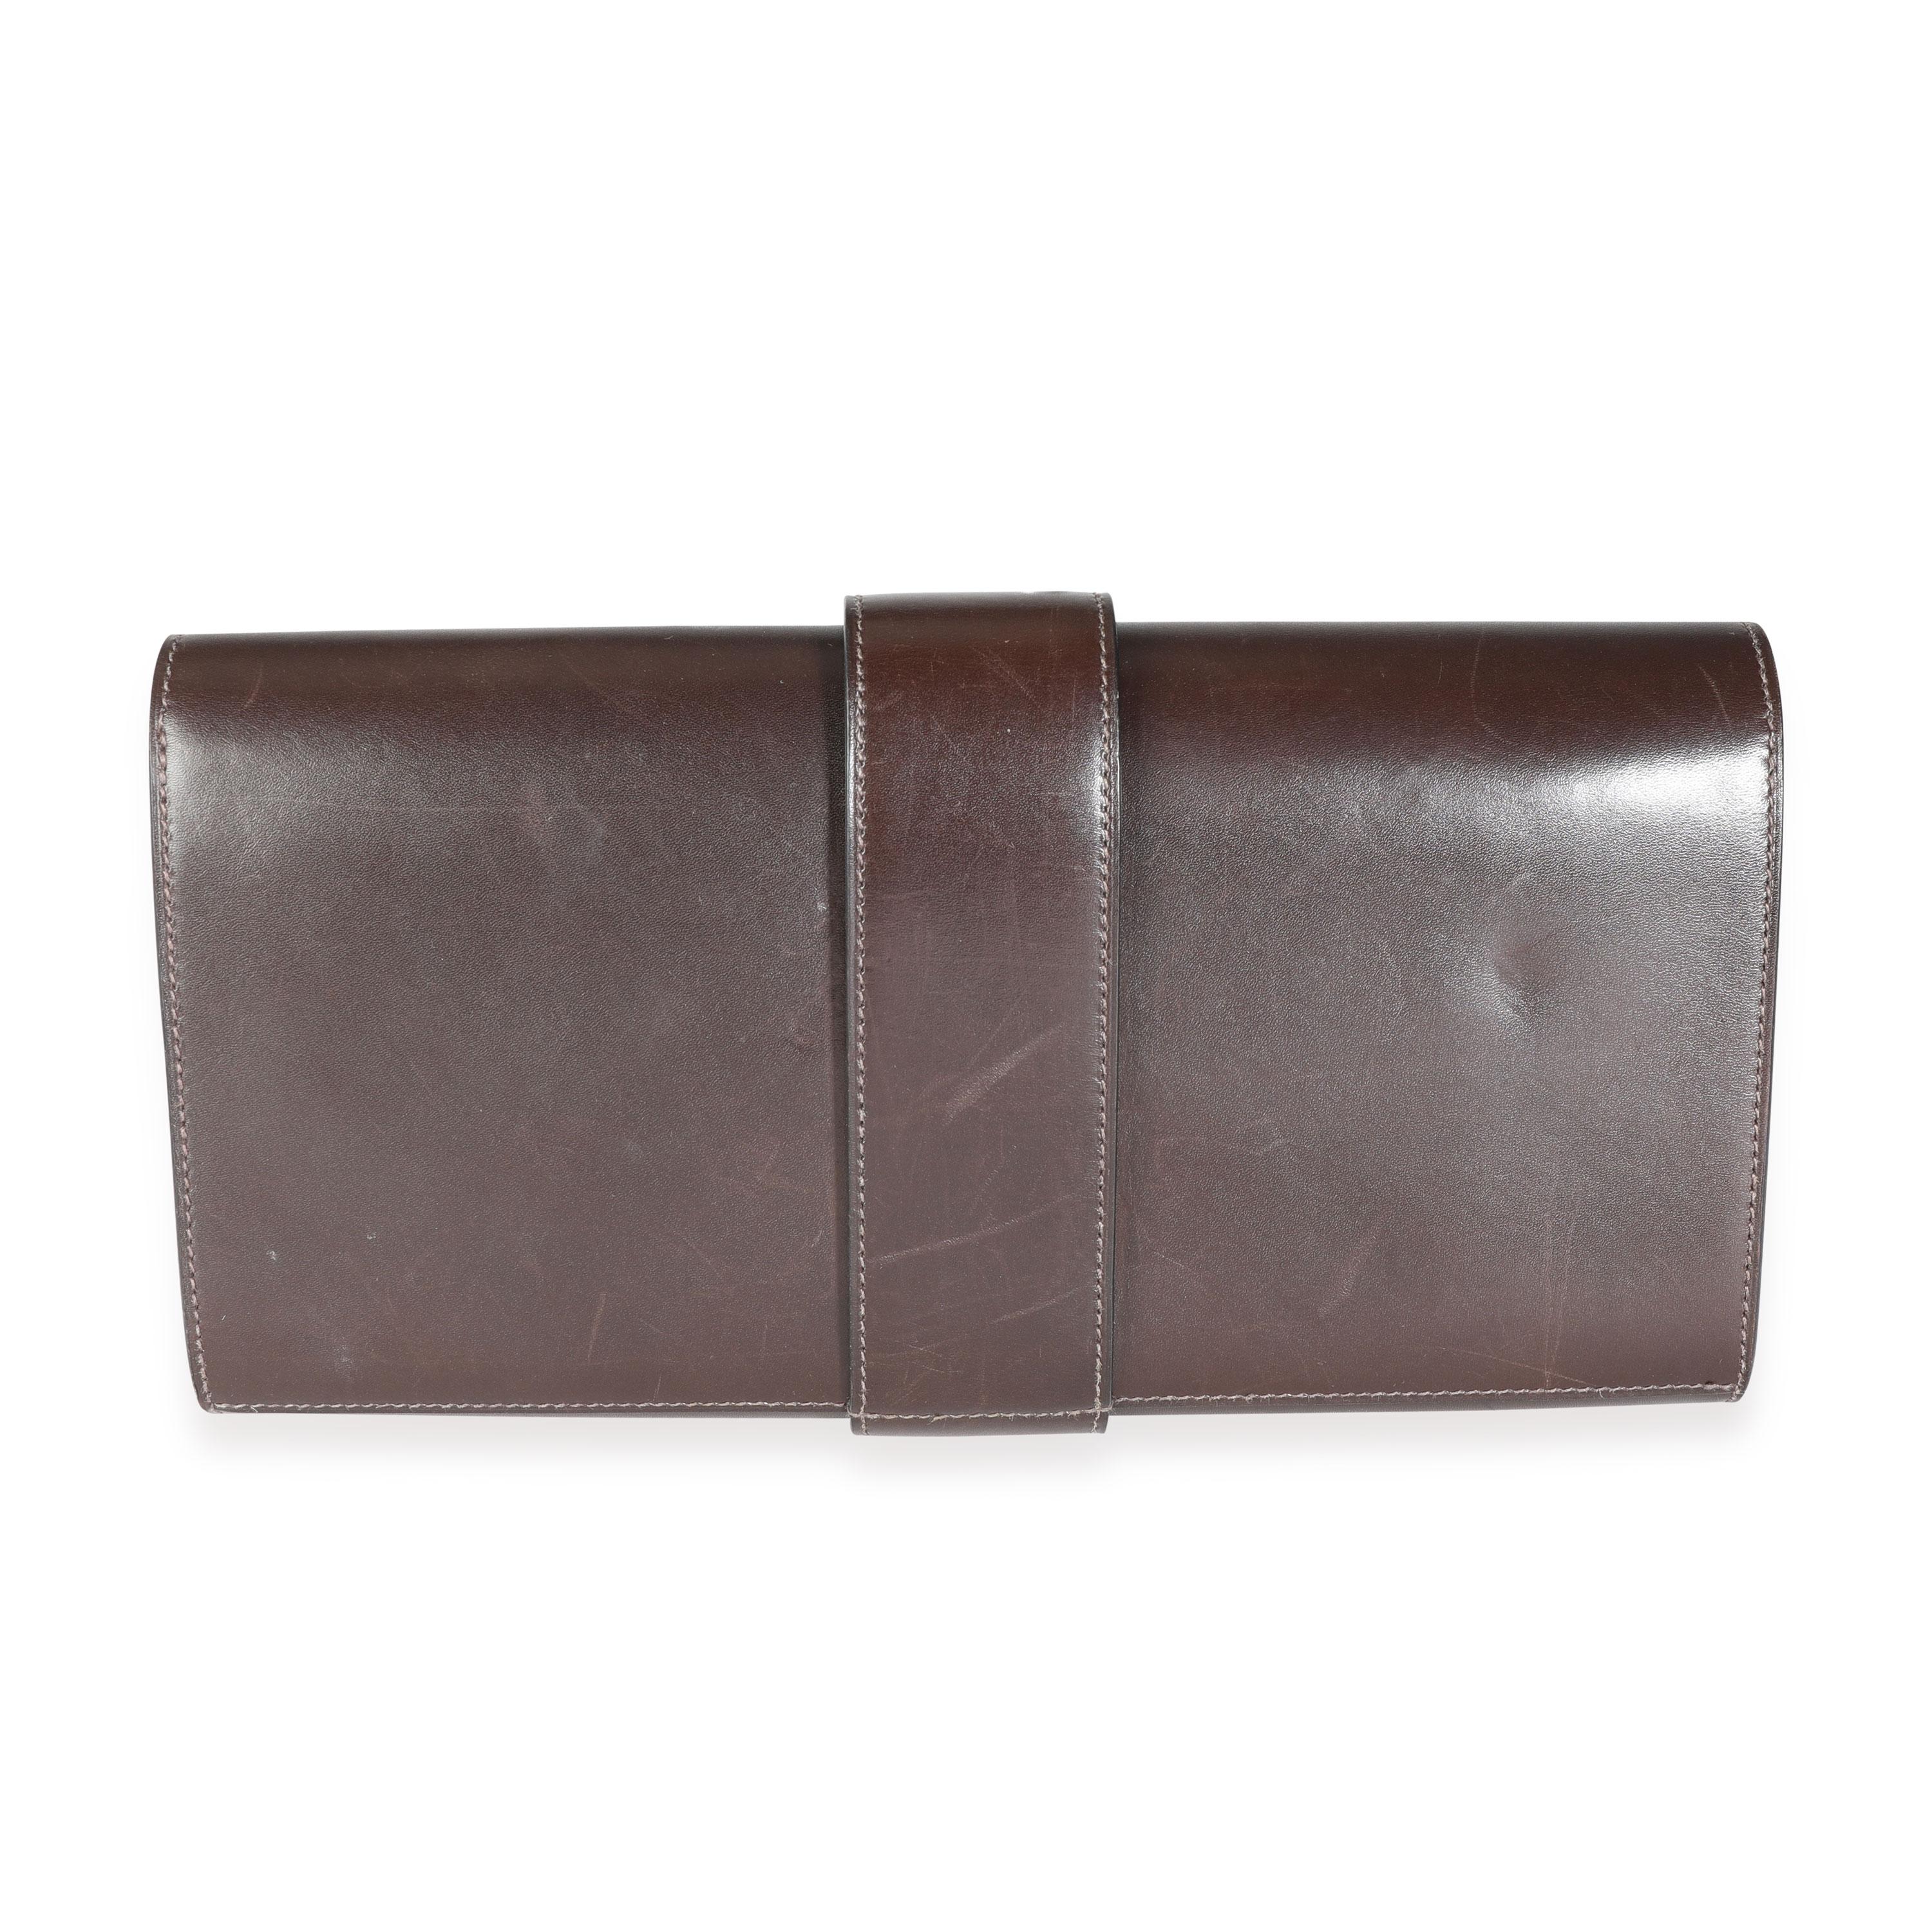 Listing Title: Hermès Chocolat Box Calf Medor 29 GHW
SKU: 115080
Condition: Pre-owned (3000)
Handbag Condition: Very Good
Condition Comments: Very Good Condition. Scratching throughout exterior due to nature of the leather. Scratching to